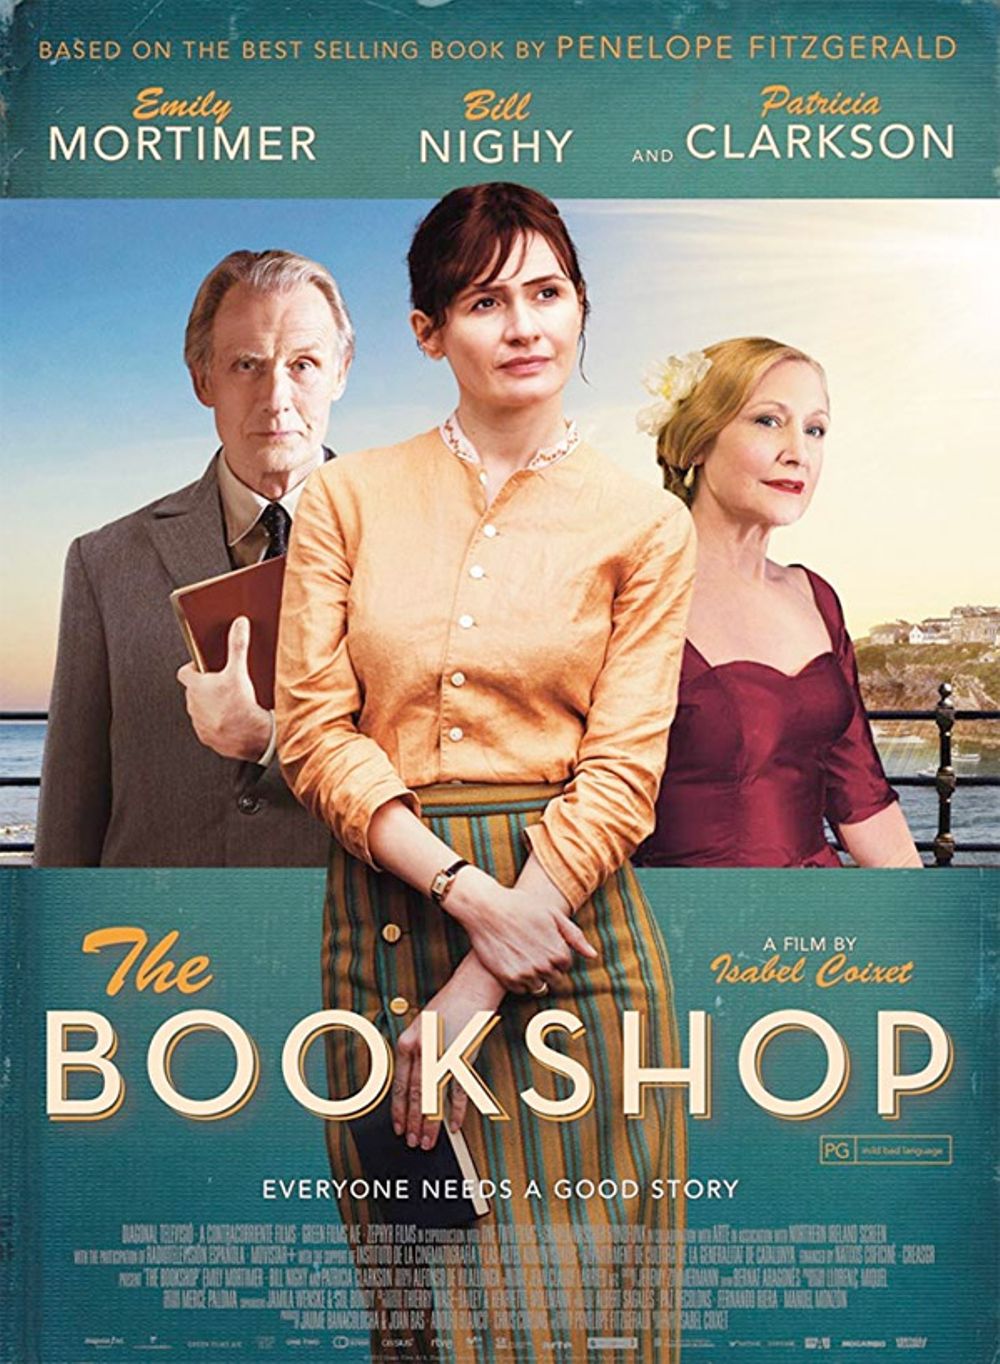 The Bookshop Movie Review